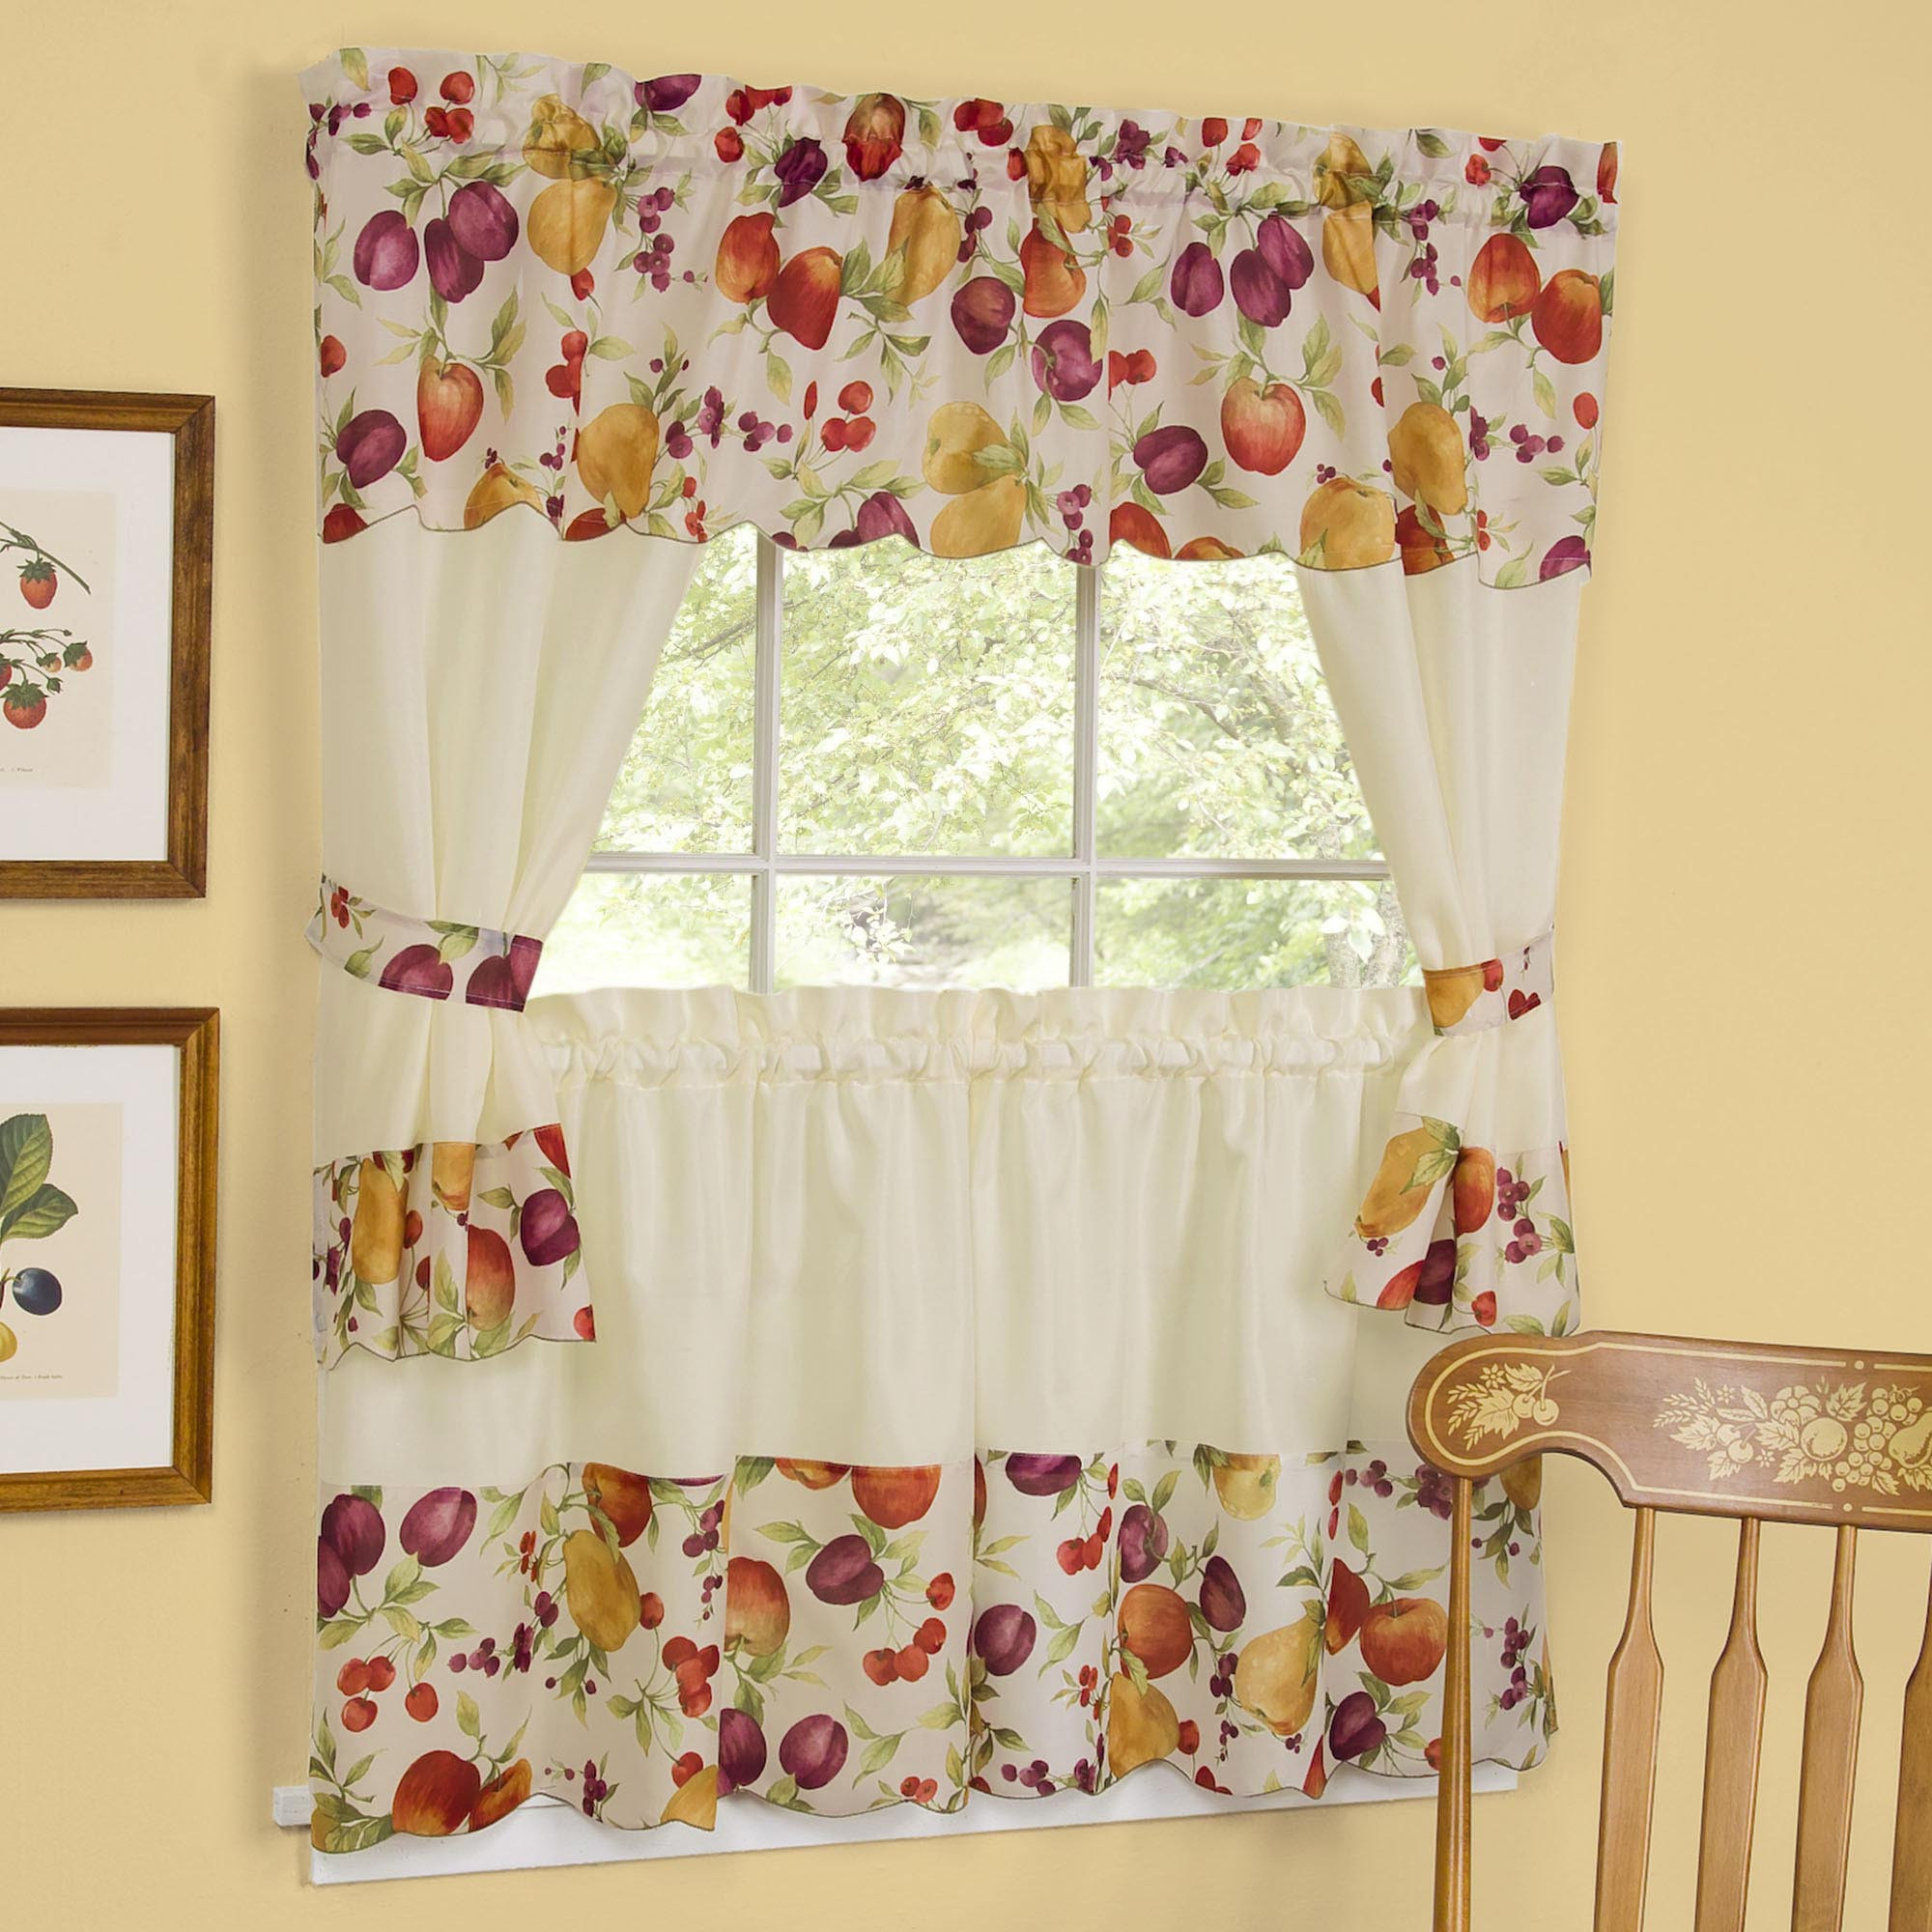 Kitchen Swags Curtains
 Kitchen Curtains Swags And Valances